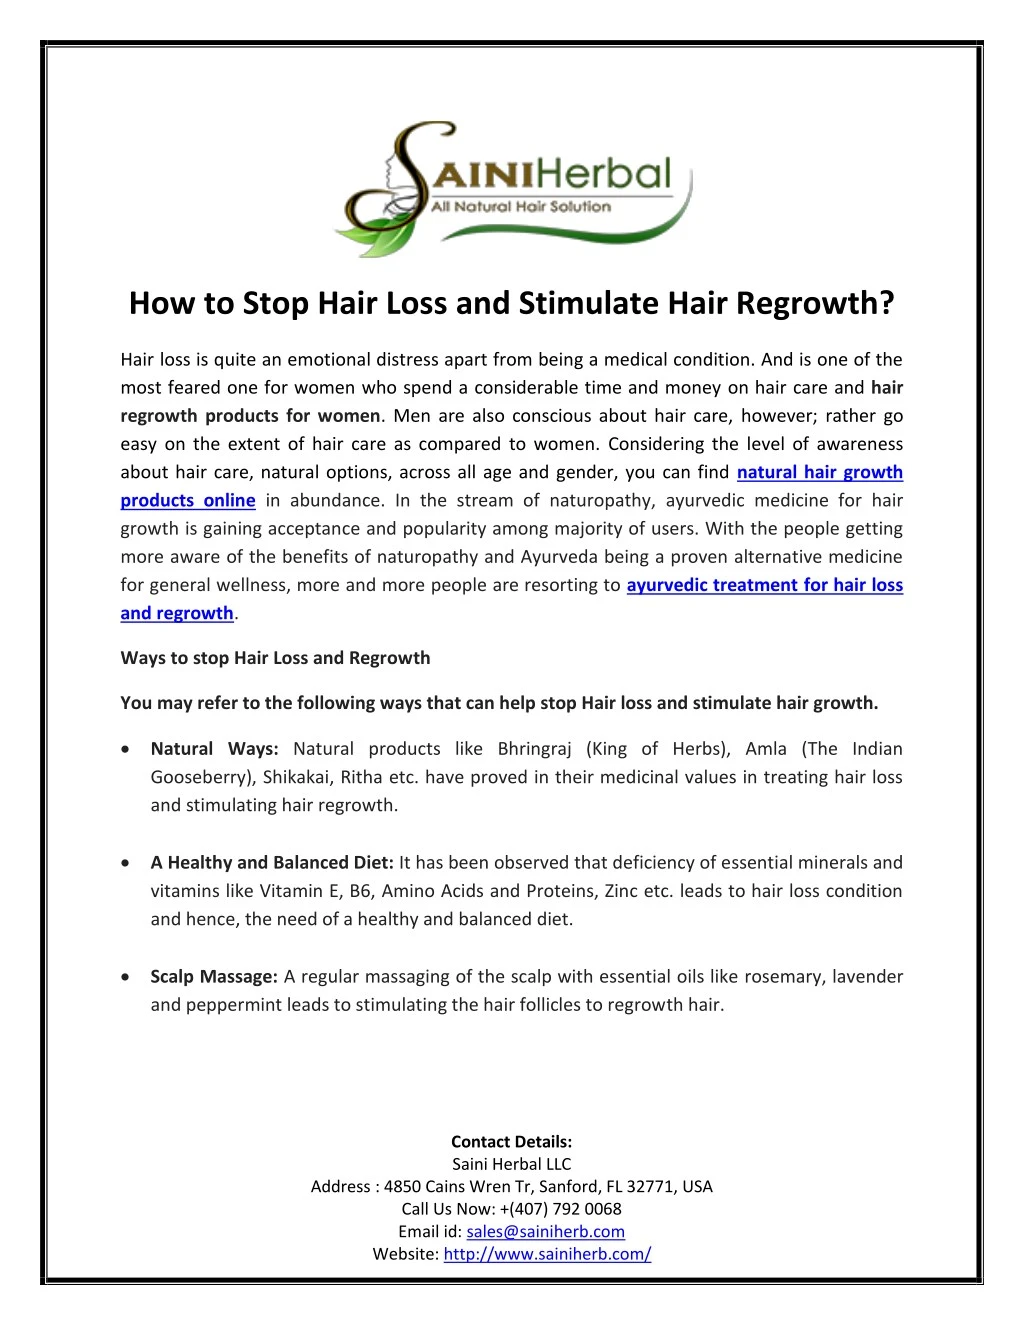 how to stop hair loss and stimulate hair regrowth